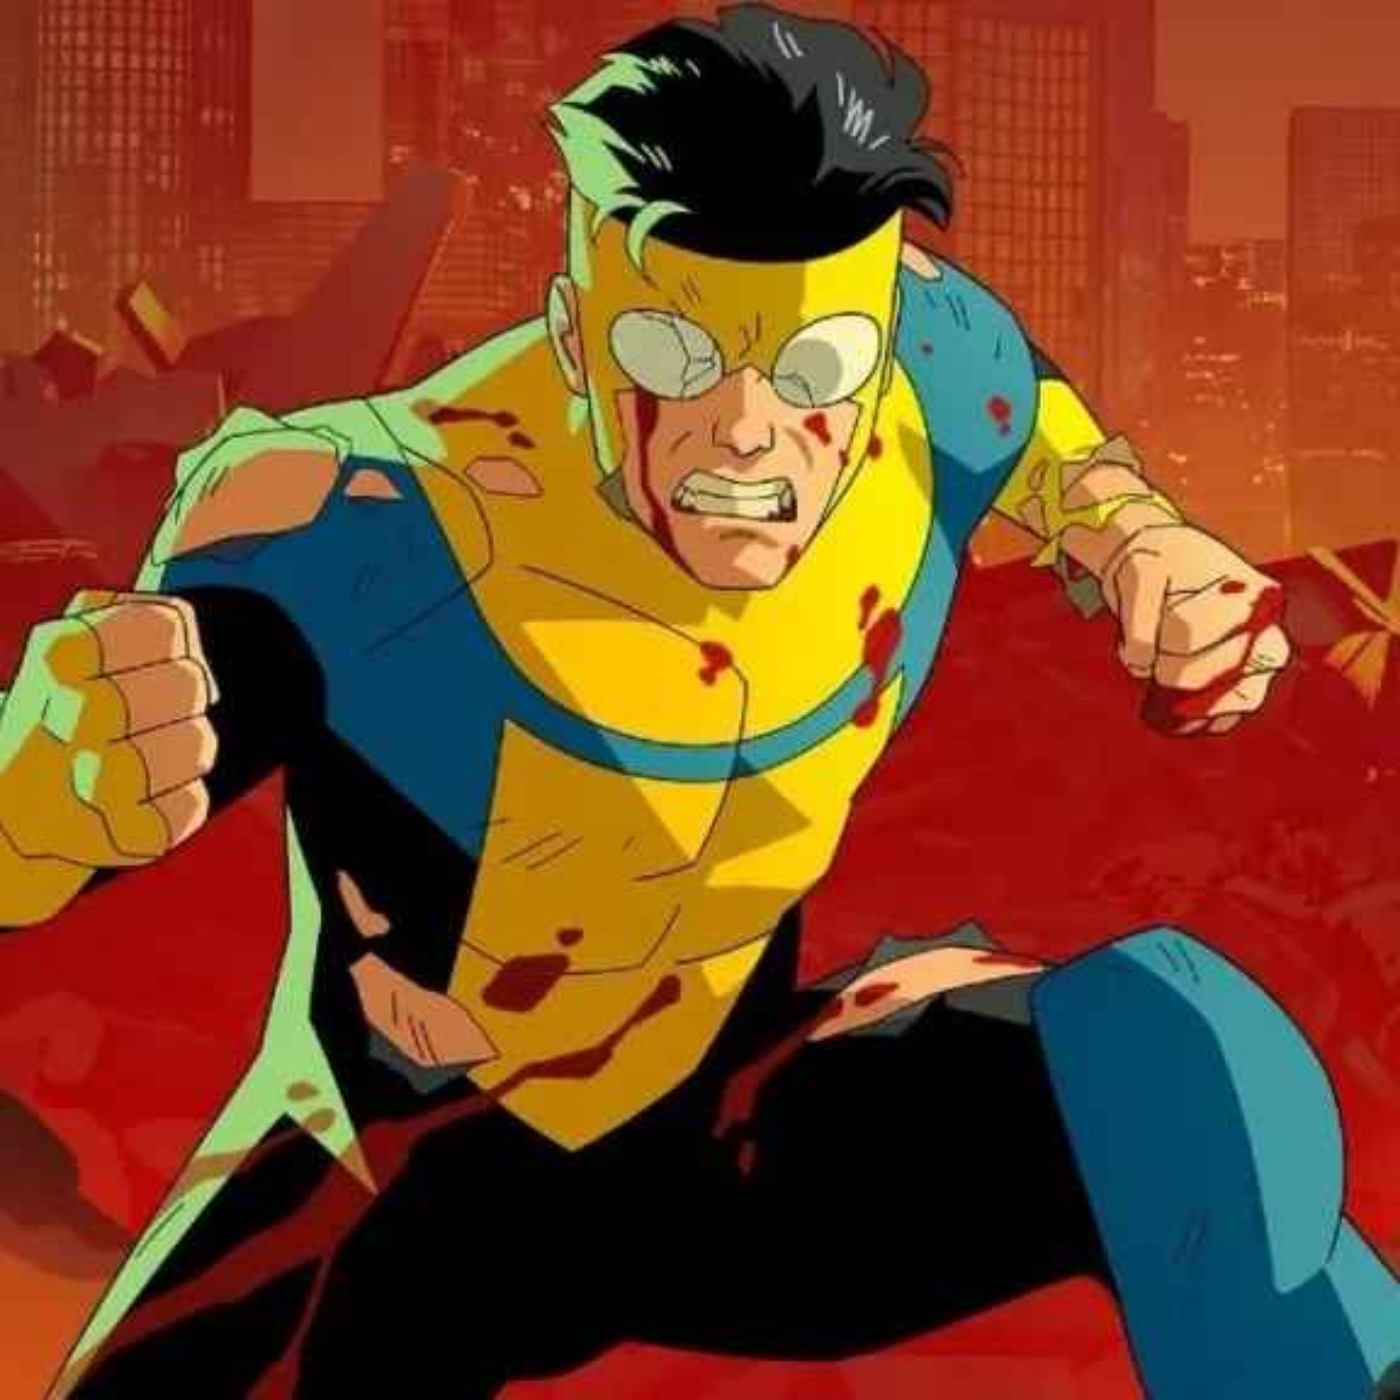 cover art for This Week In Streaming: Invincible Season 2 Eps 1-4